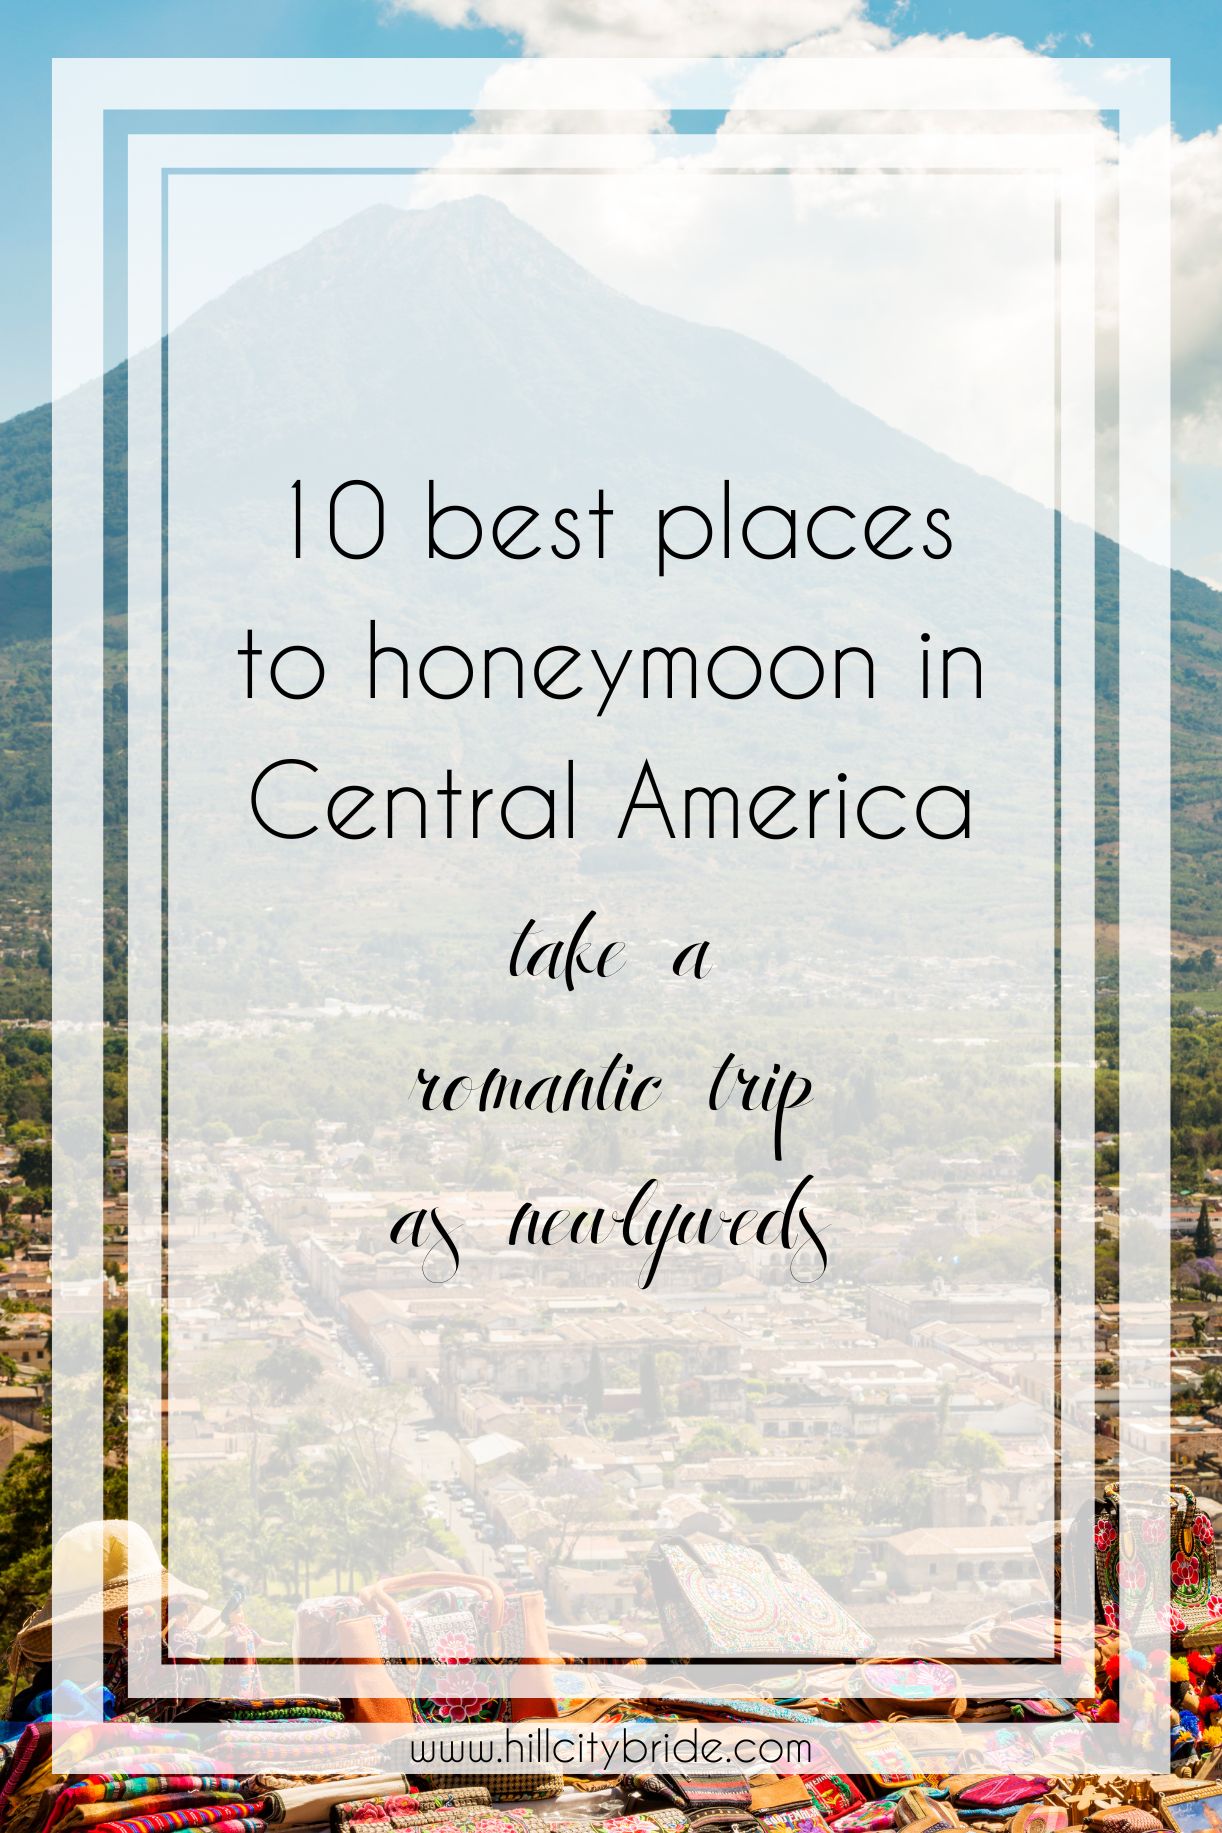 10 Best Places to Honeymoon in Central America